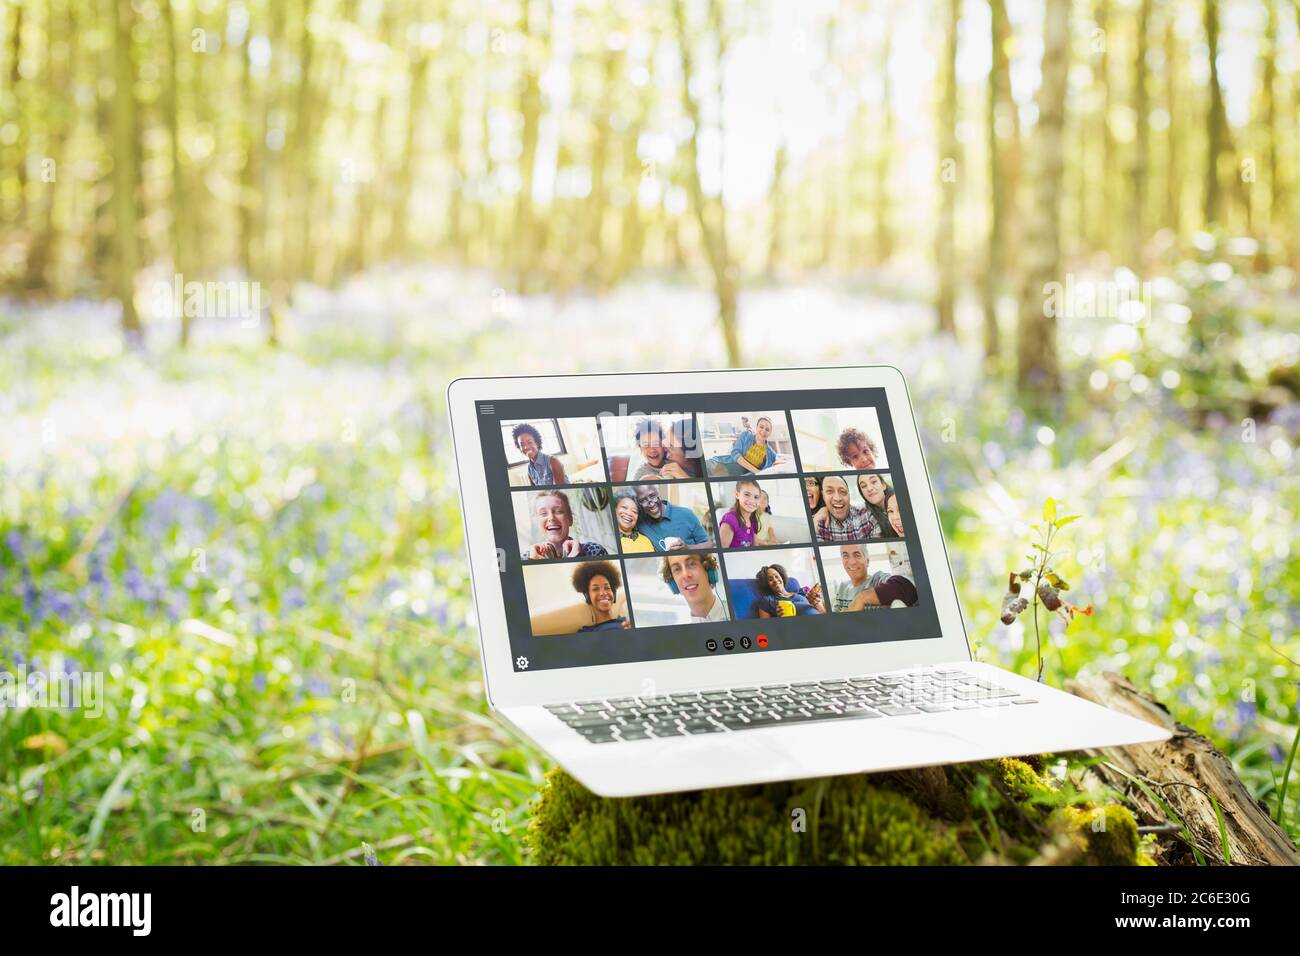 Friends video chatting on laptop screen in sunny woods Stock Photo